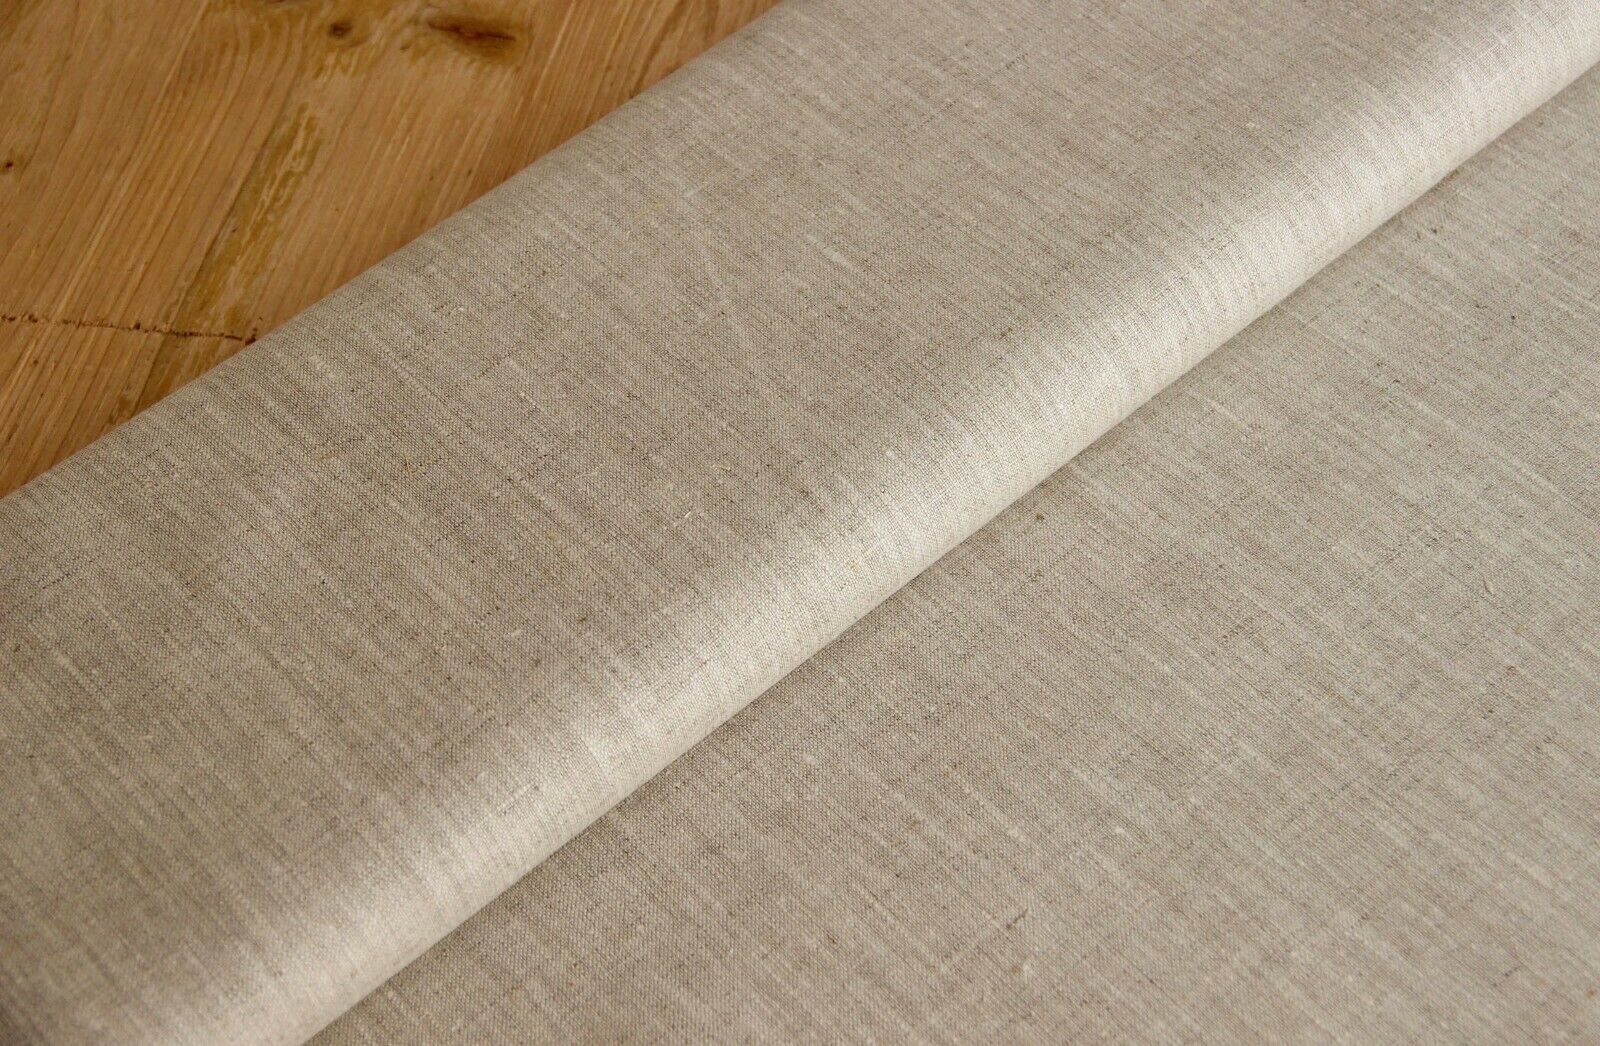 Linen Rustic - sold by the meter NATURAL fabric bleached 100% linen * 50 cm x 145 cm - 0